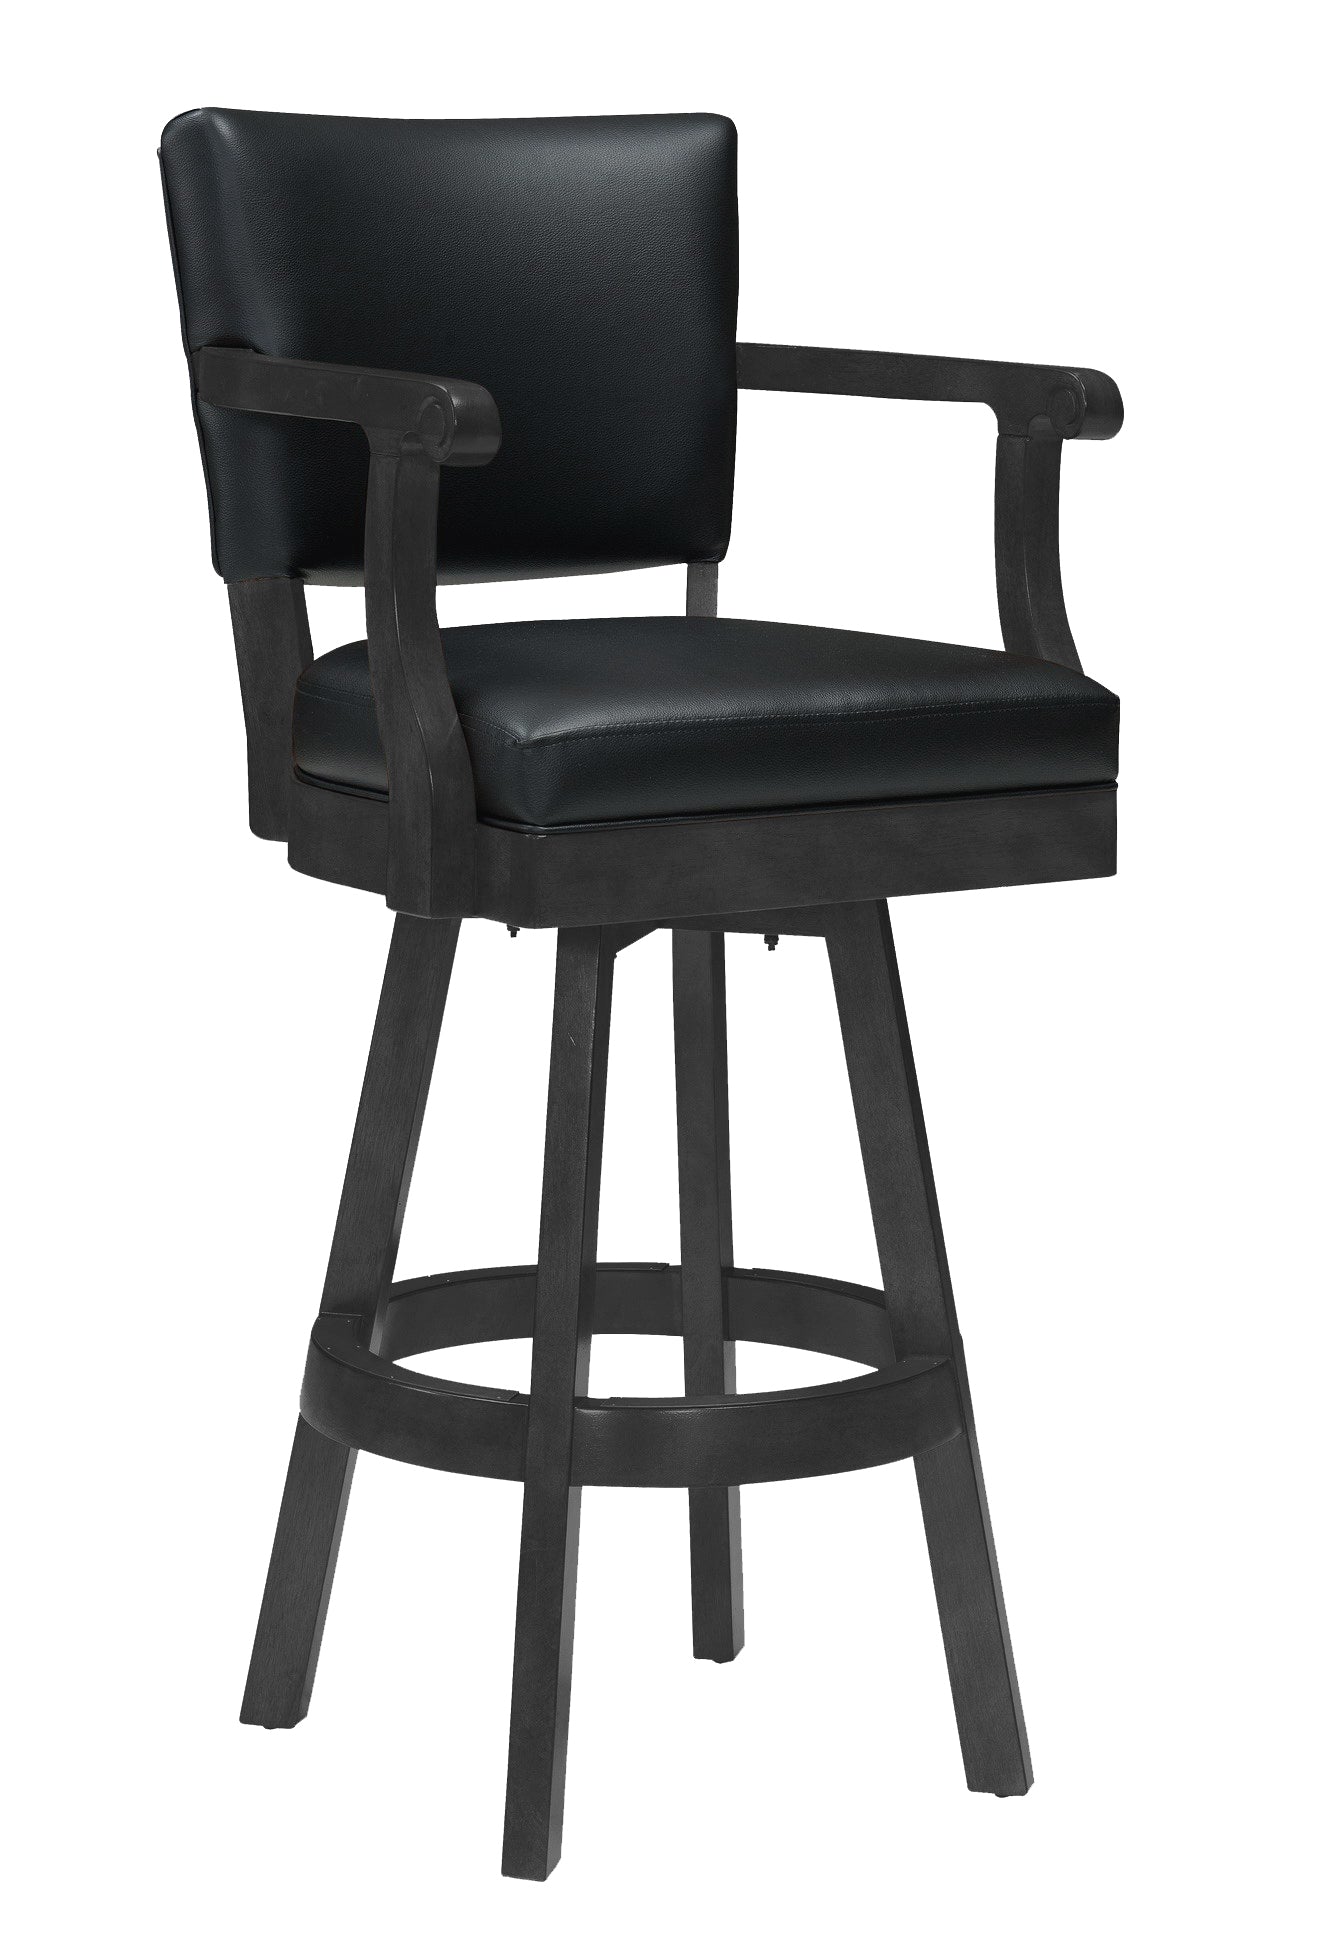 Legacy Billiards Classic Backed Barstool in Graphite Finish